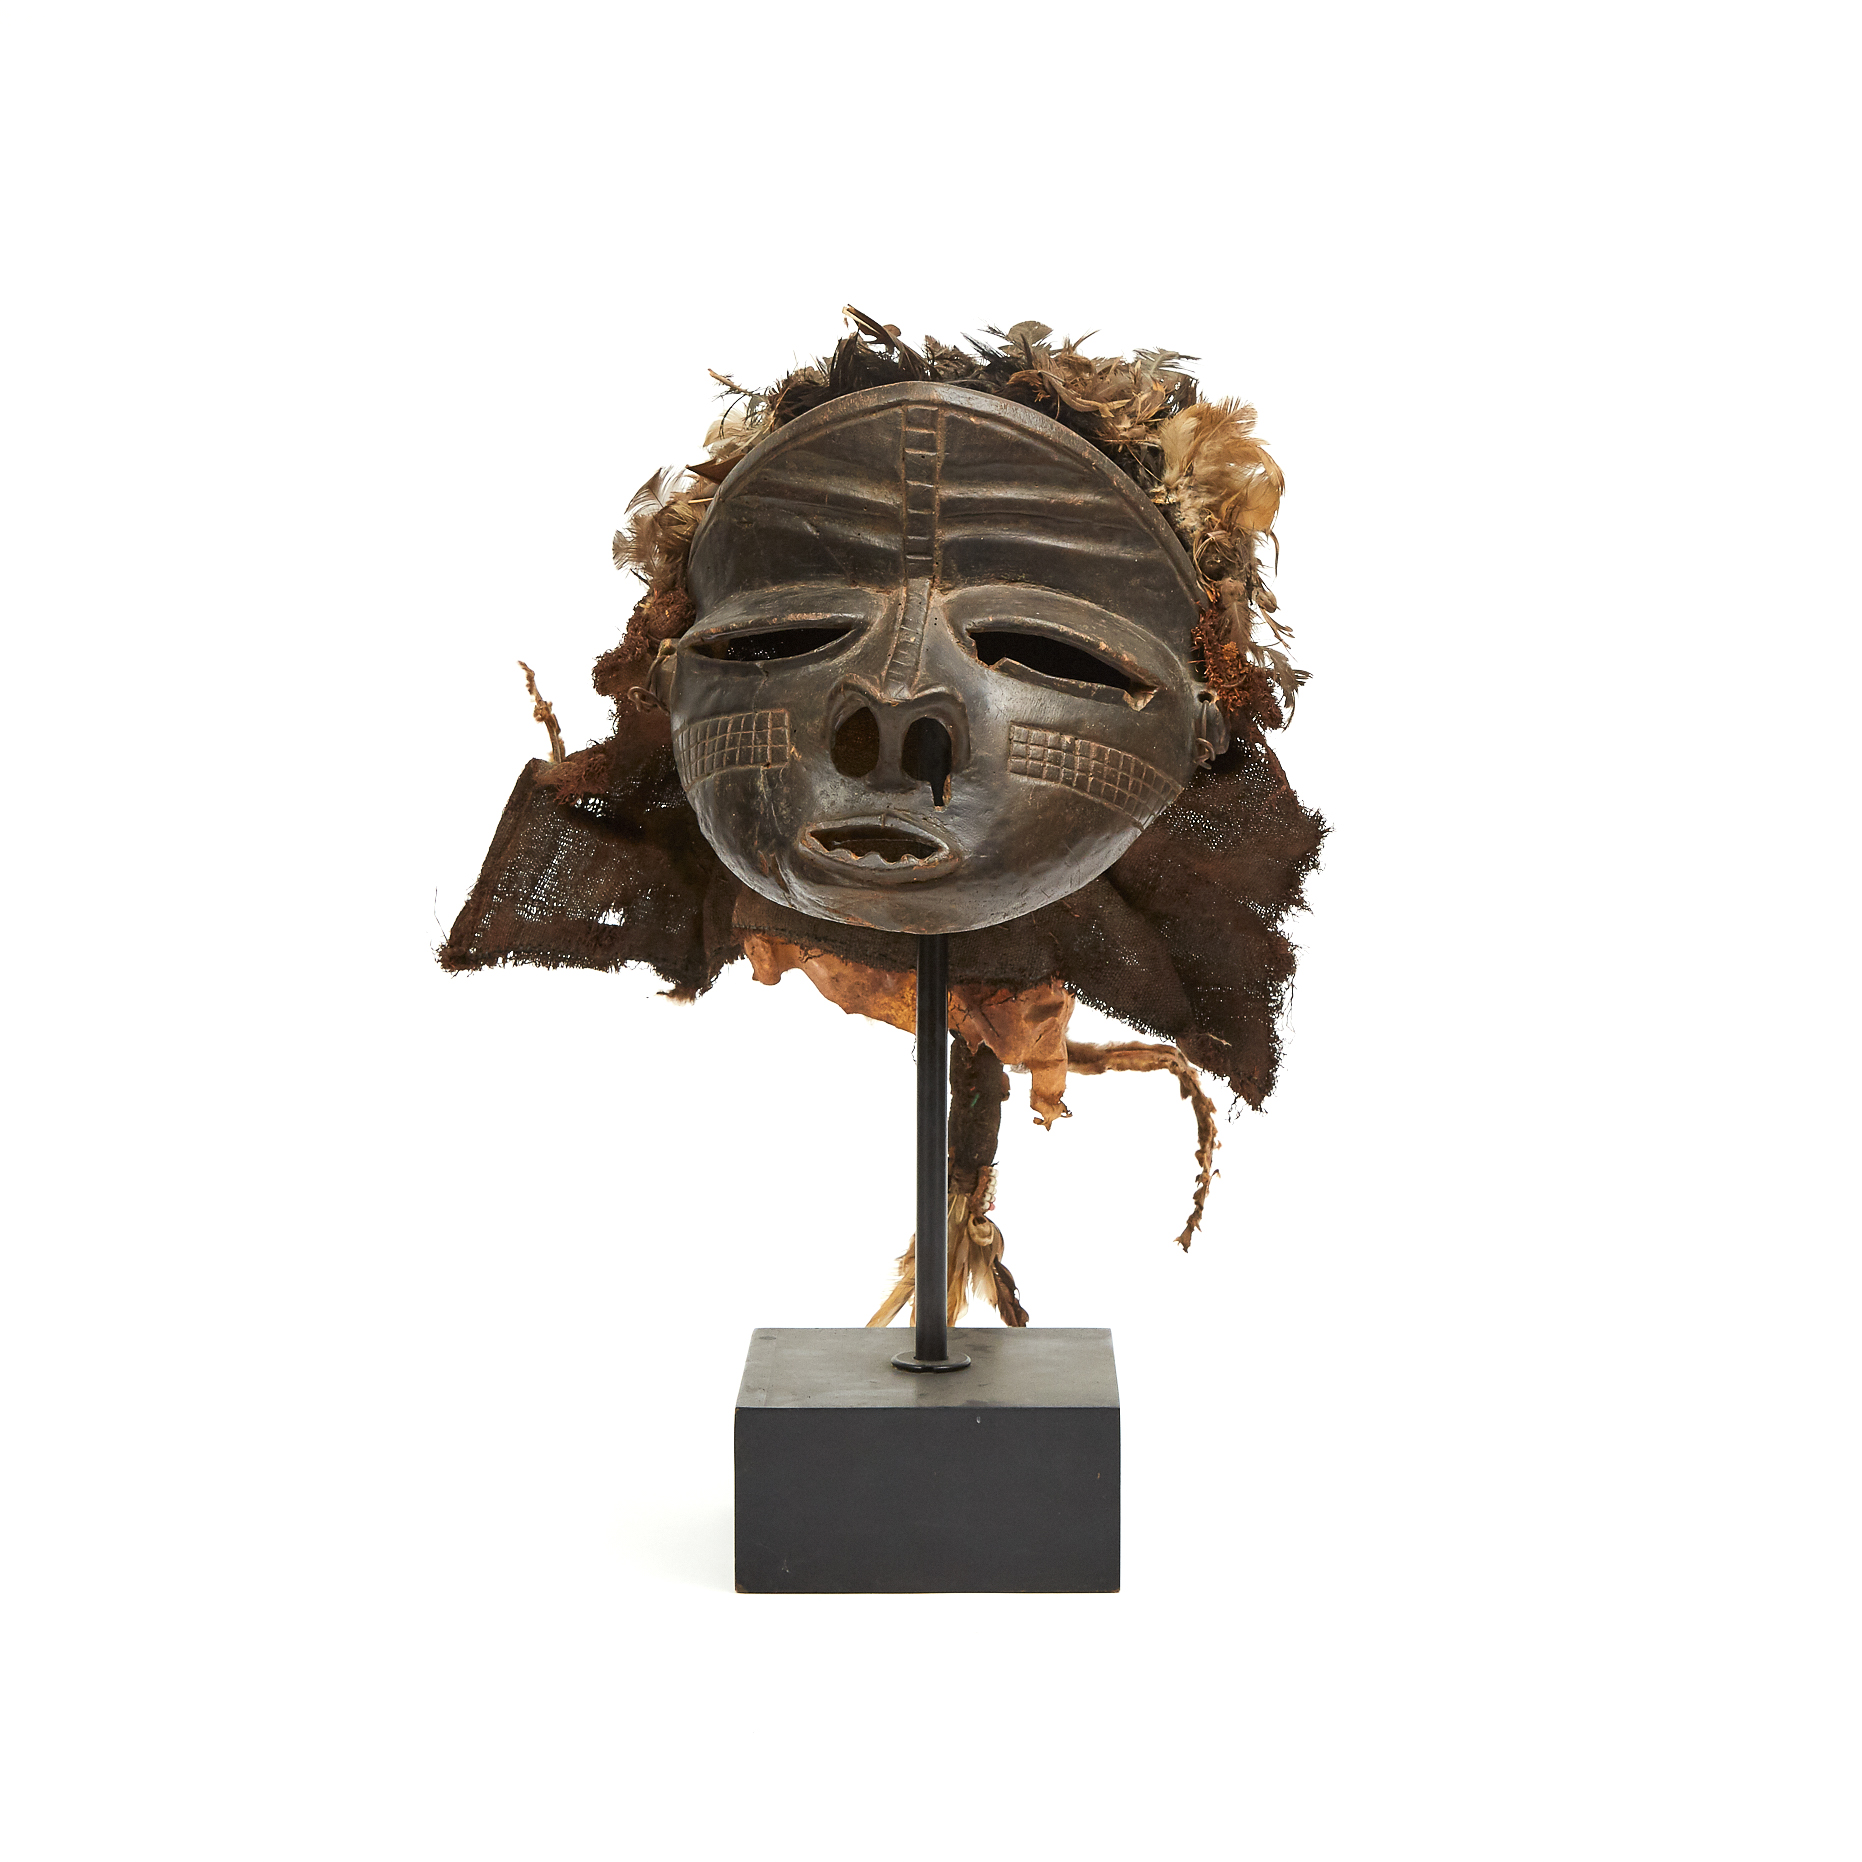 Pende Mask, early to mid 20th century, Democratic Republic of Congo, Central Africa